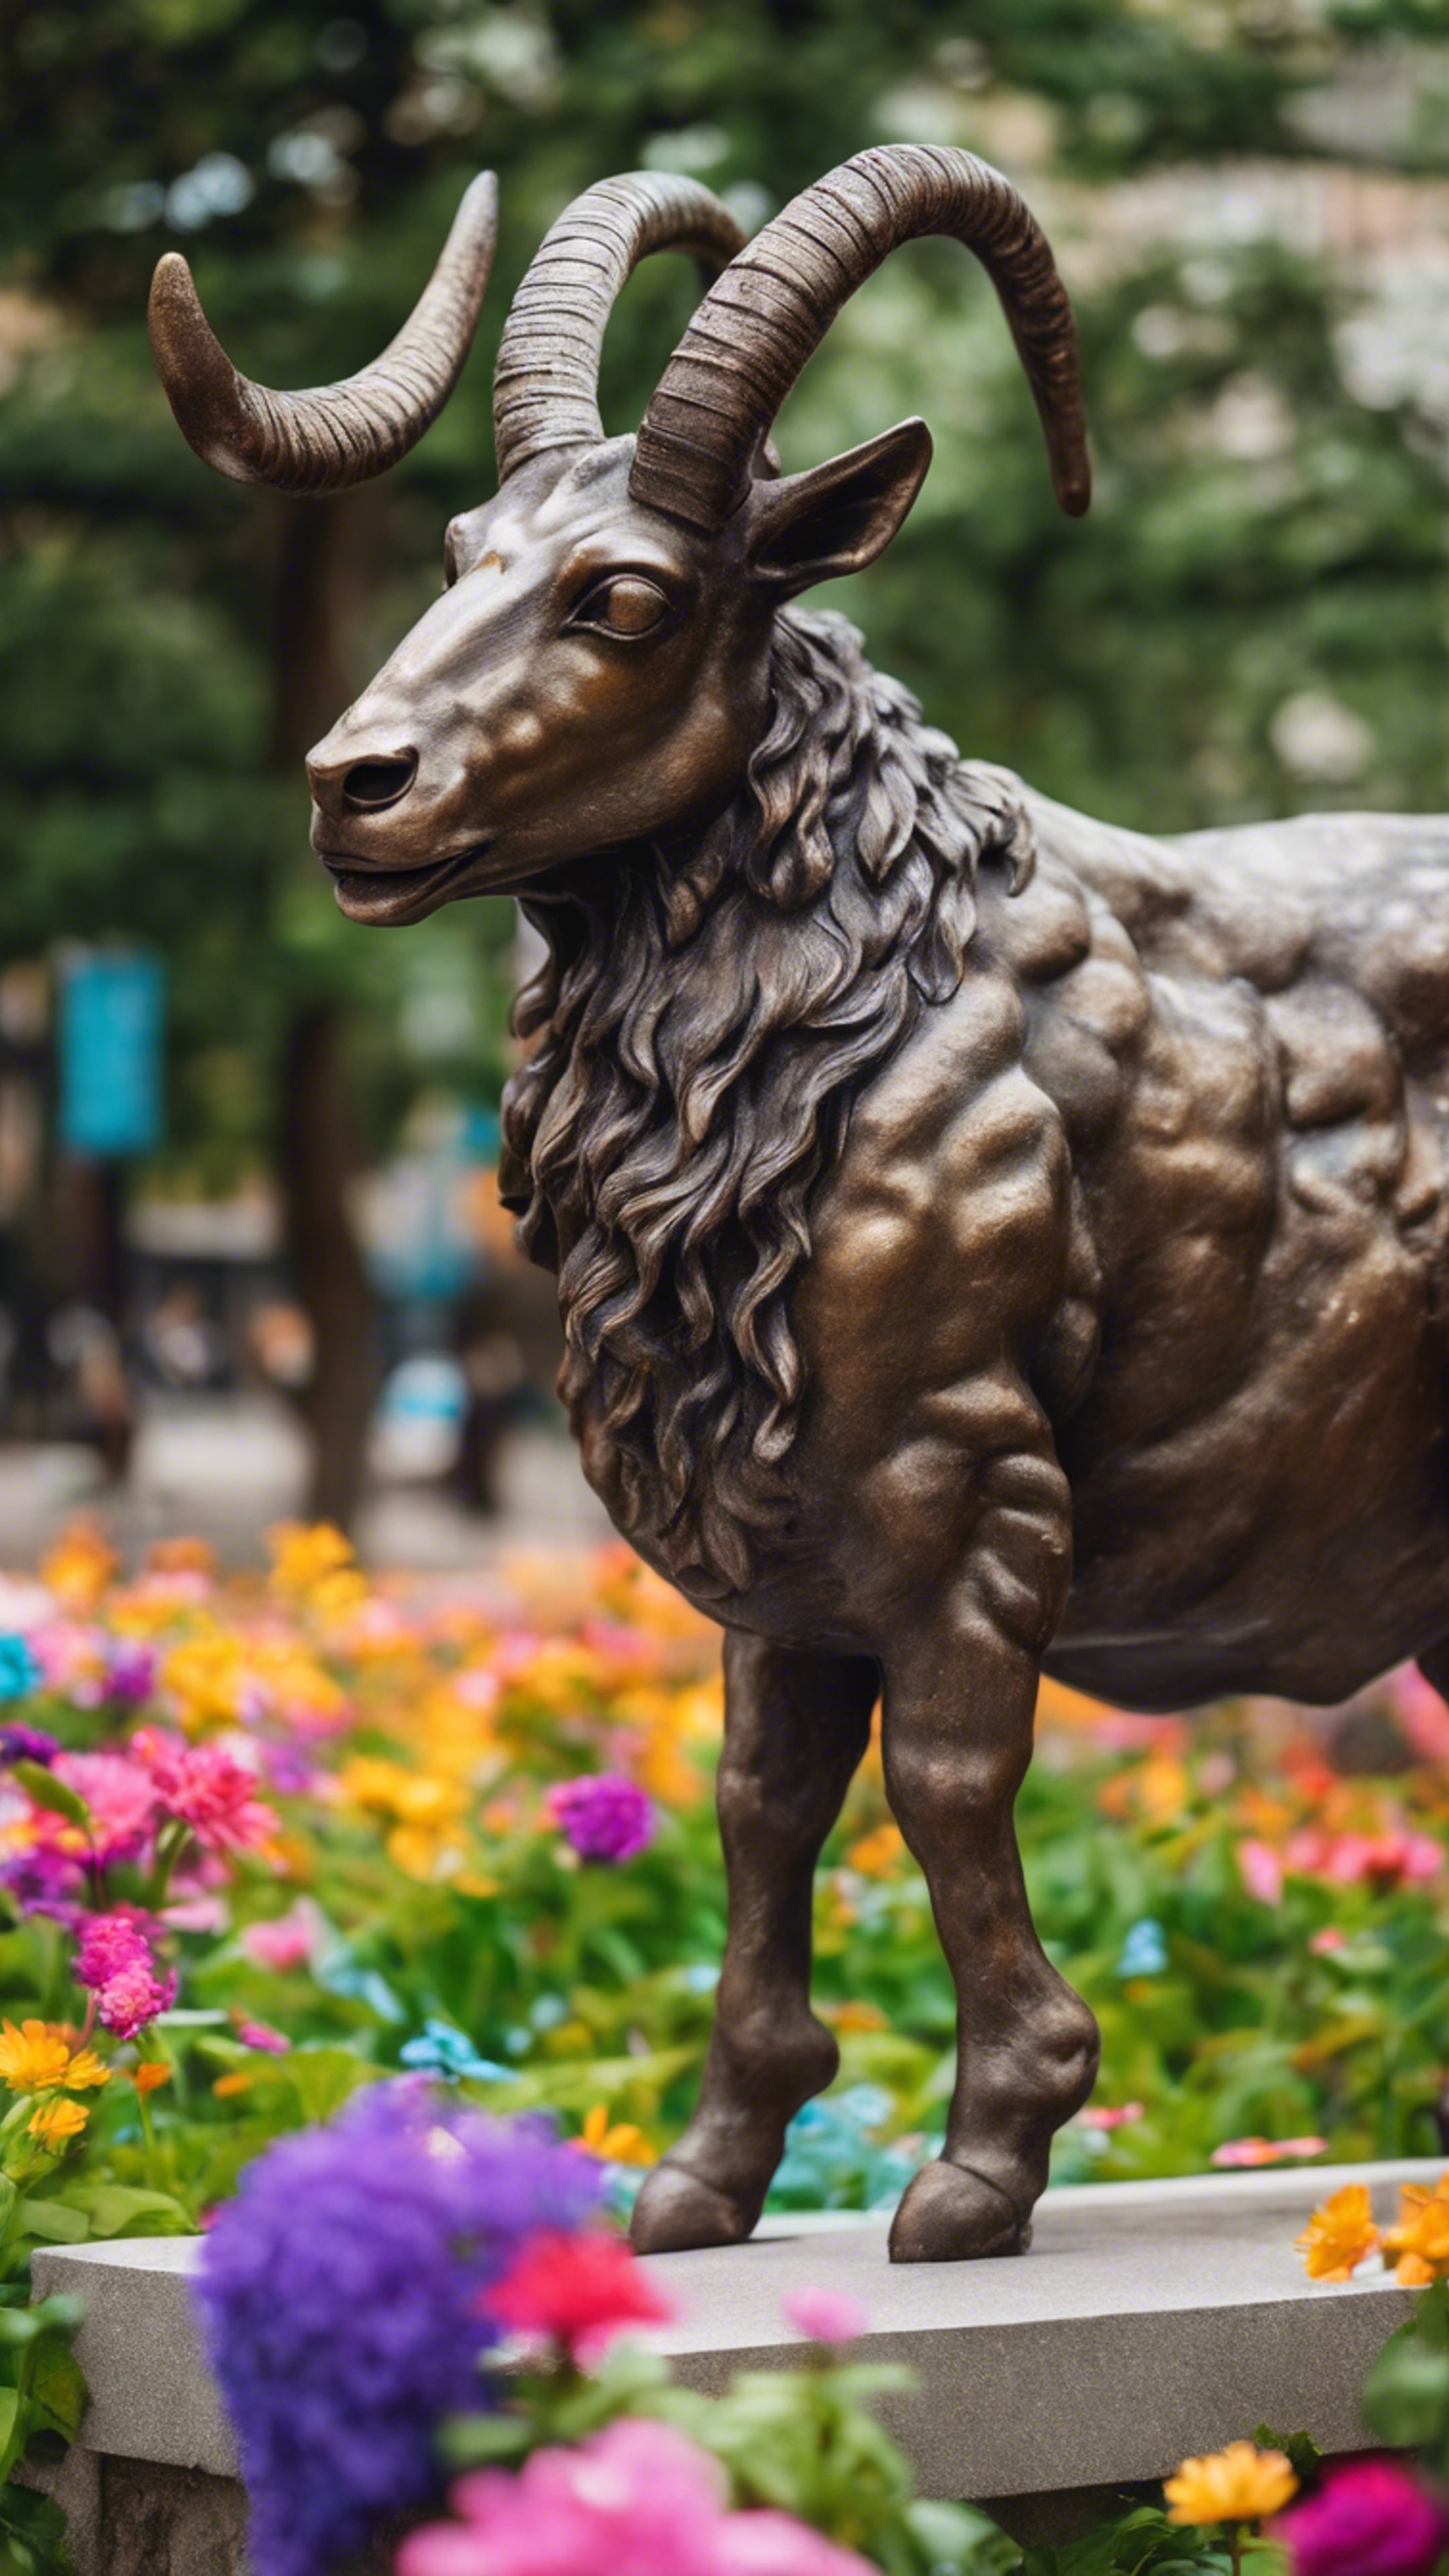 A detailed bronze statue of a Capricorn in a lively city park, surrounded by colorful flowers.壁紙[4693ead8121f483a9fe2]